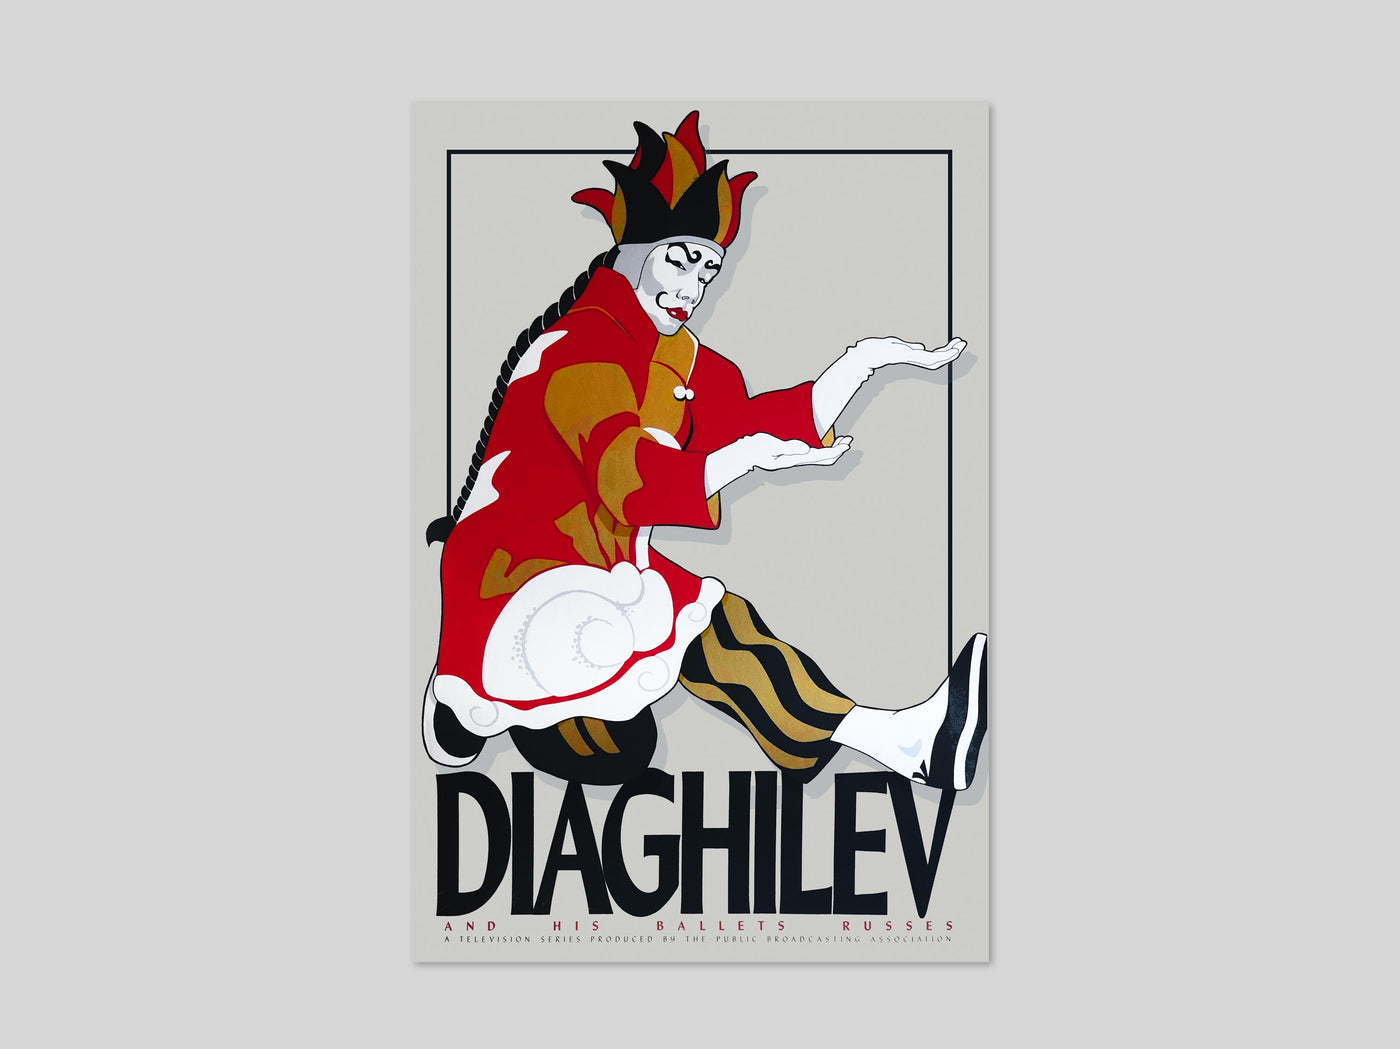 Diaghilev and His Ballets Russes - by Dan Gilbert